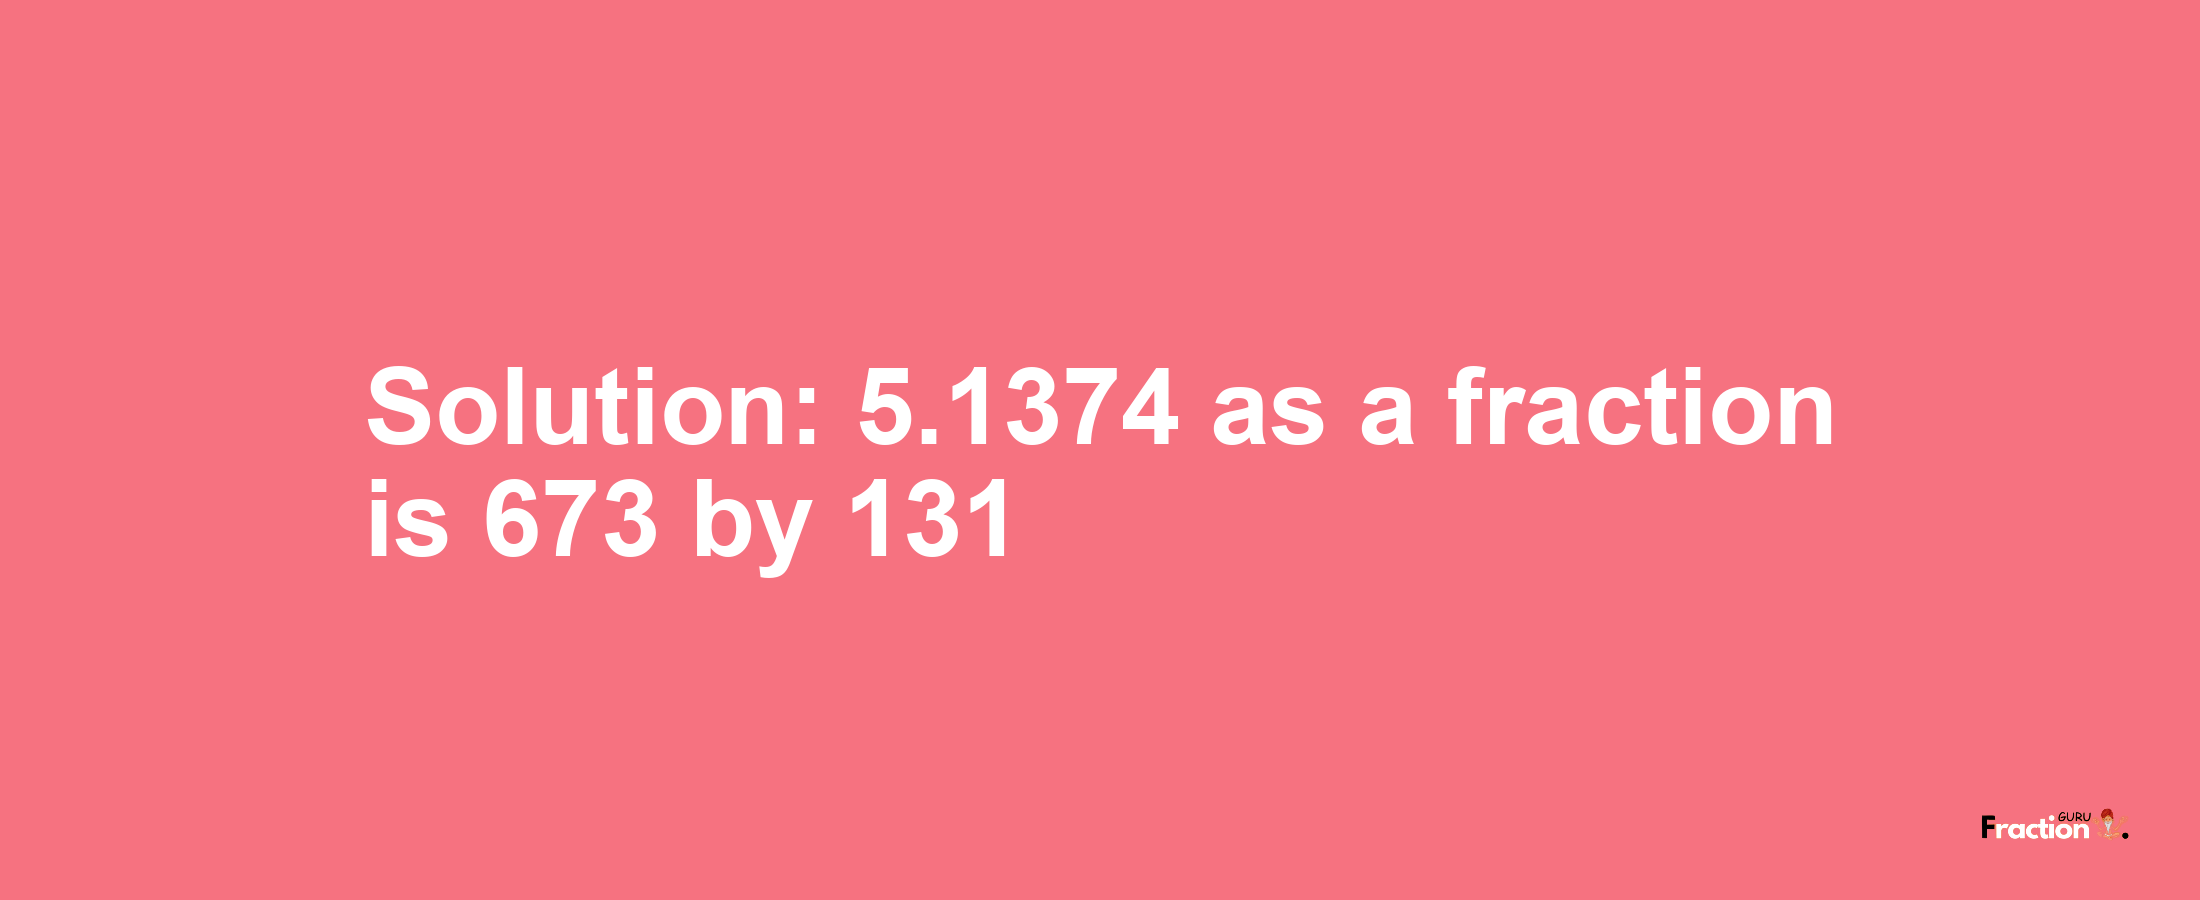 Solution:5.1374 as a fraction is 673/131